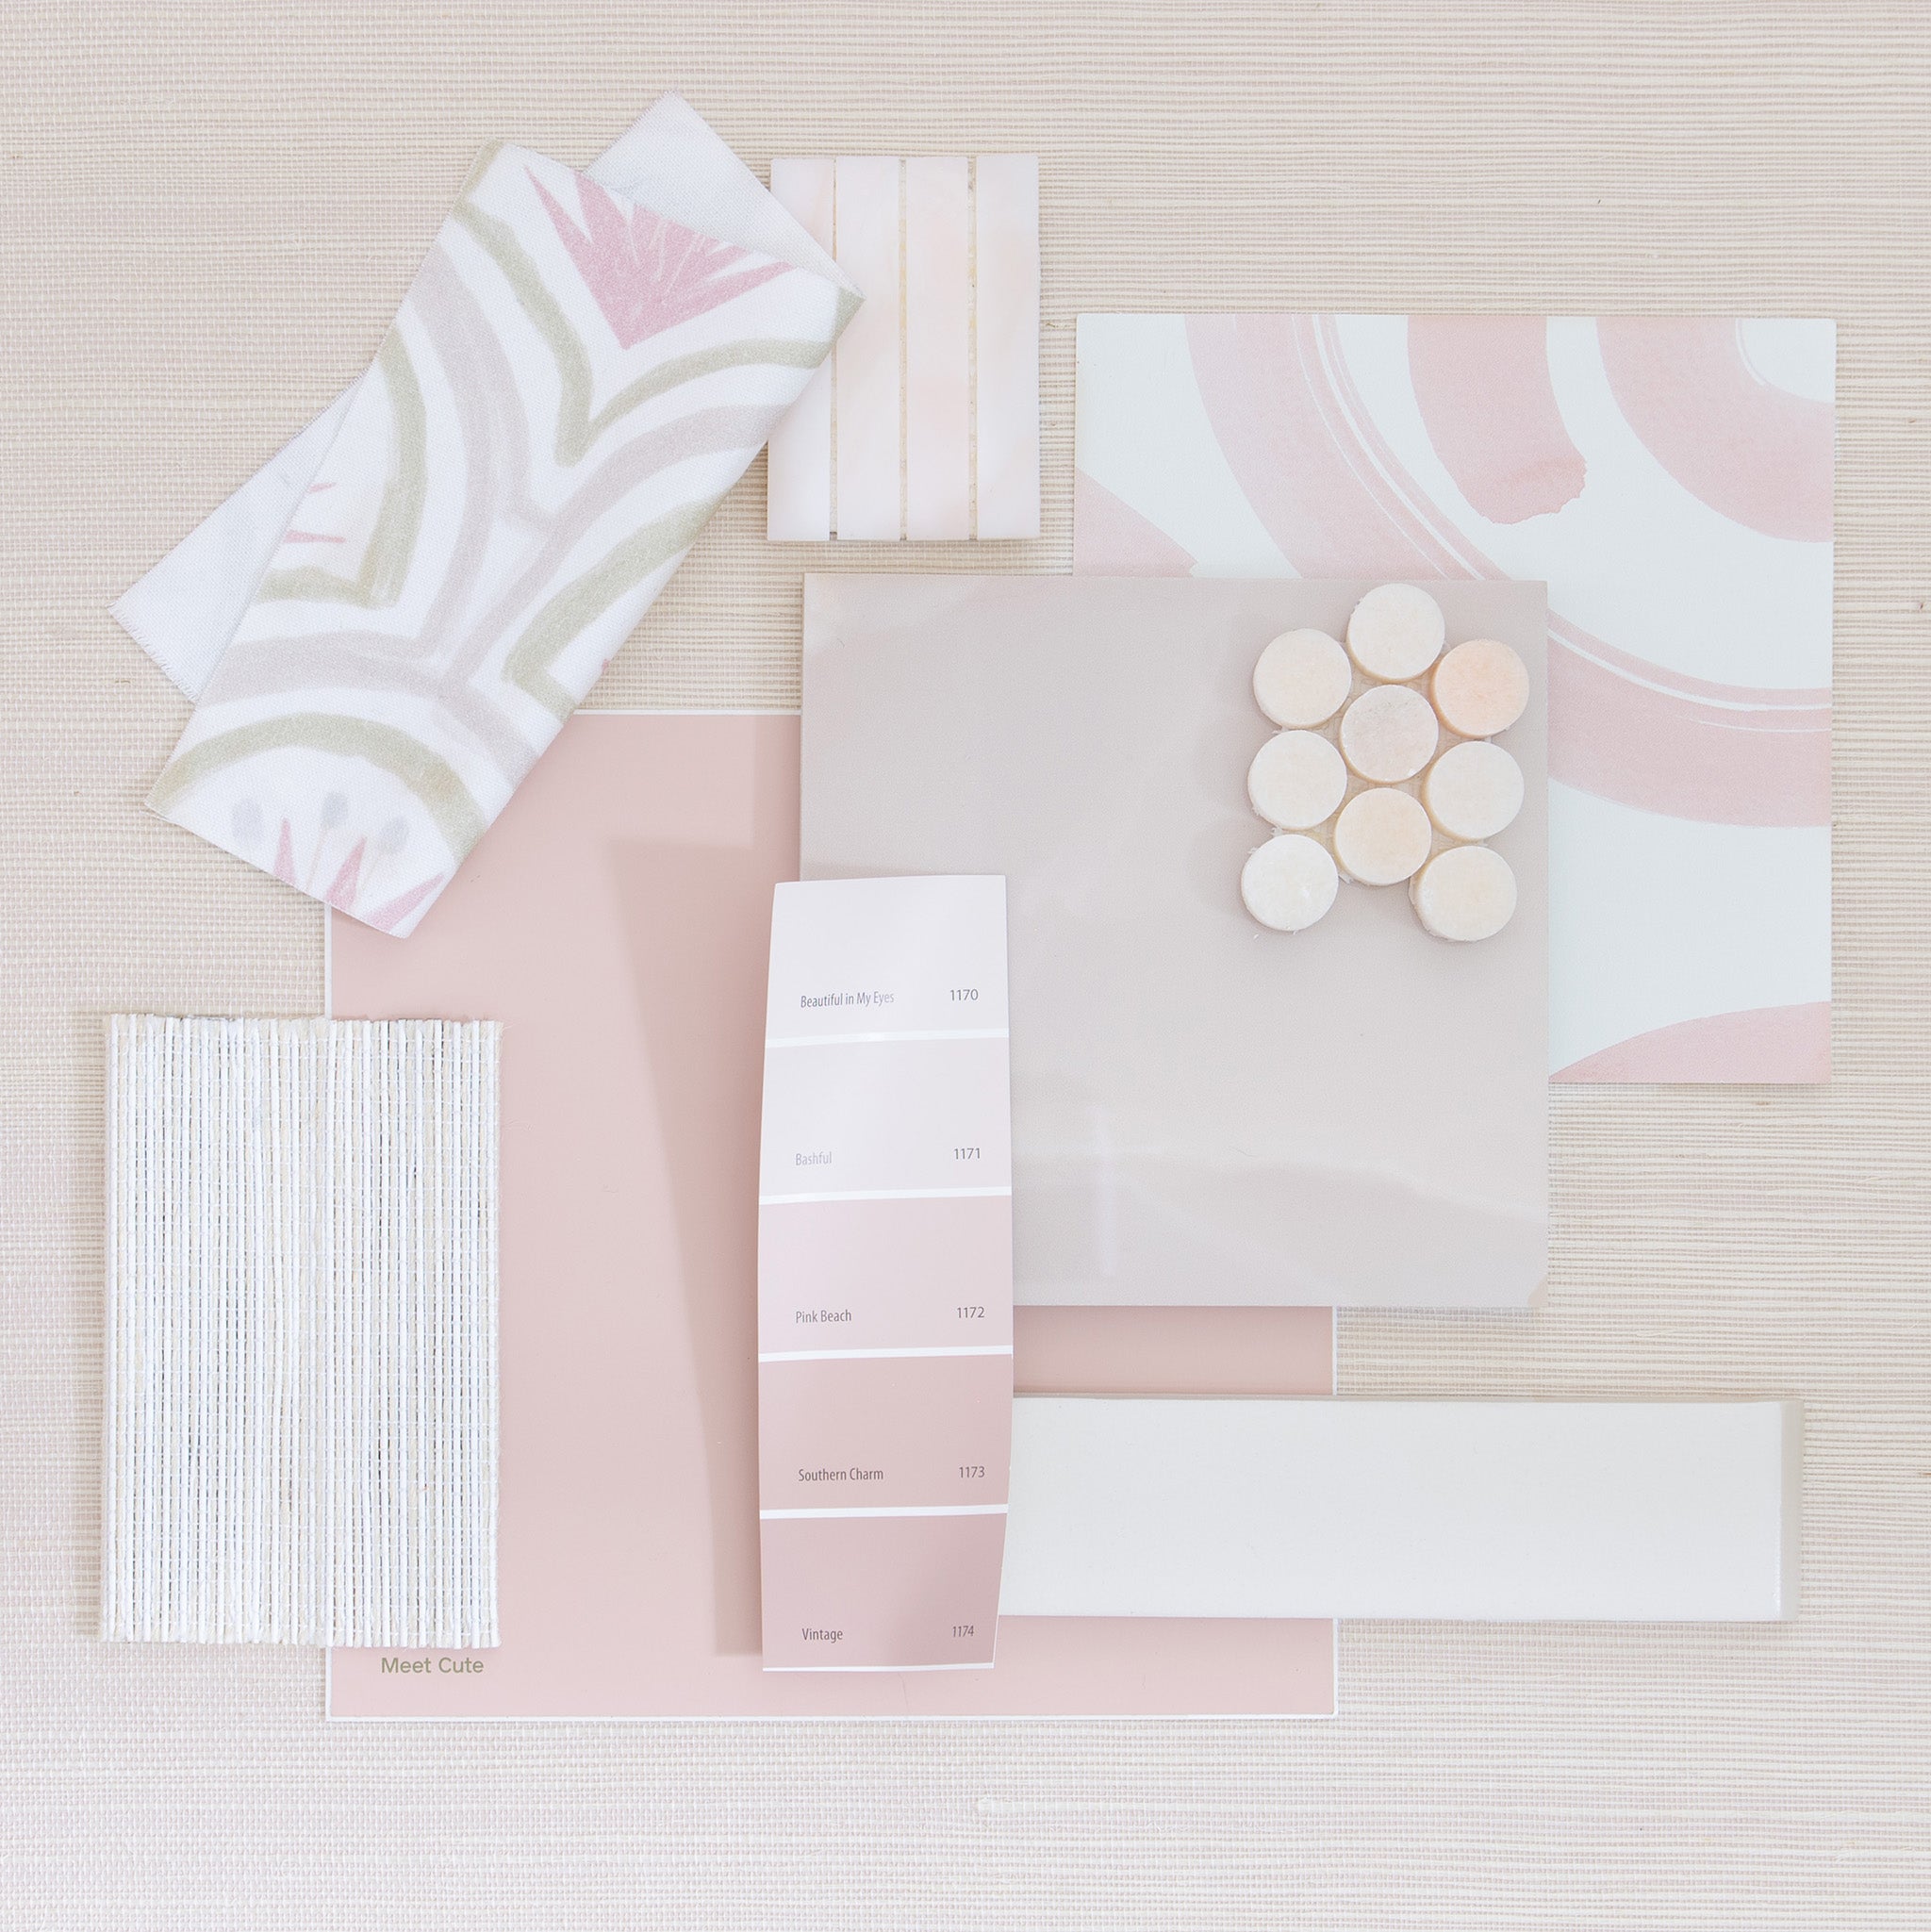 Interior design moodboard and wallpaper inspirations with pink paint and tile on top